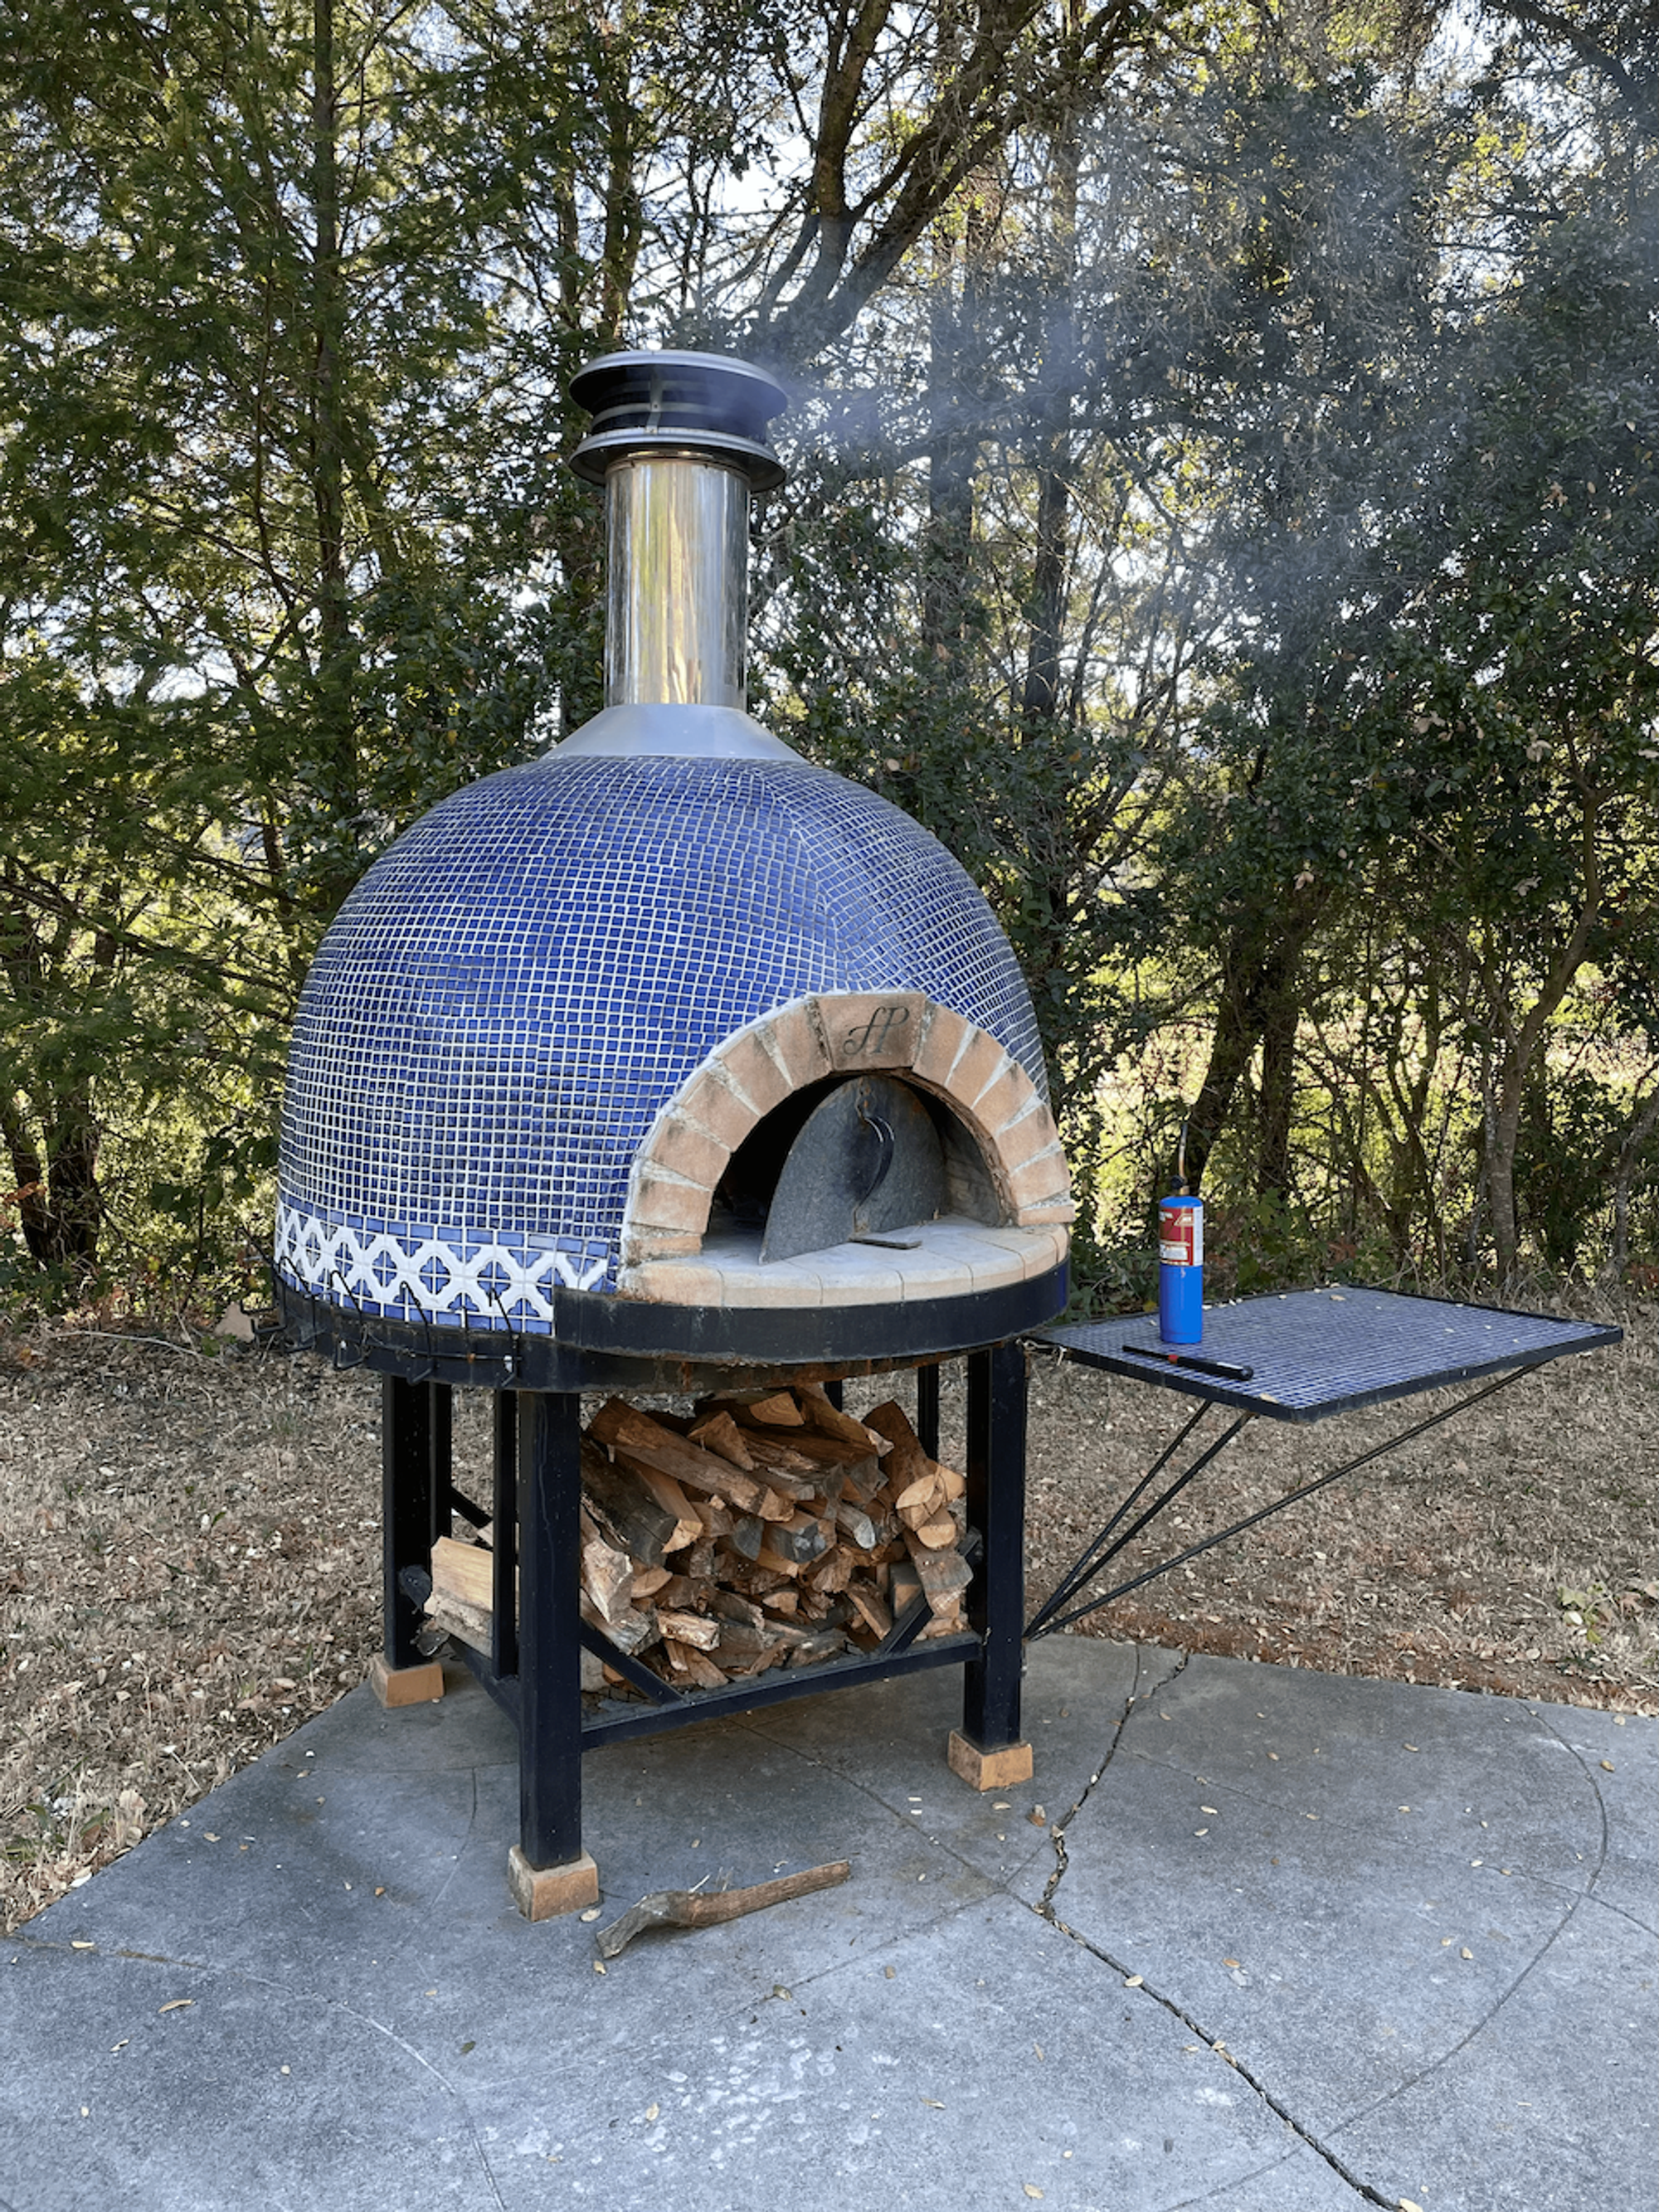 Manning the wood burning pizza oven in Sonoma, CA - Summer 2021